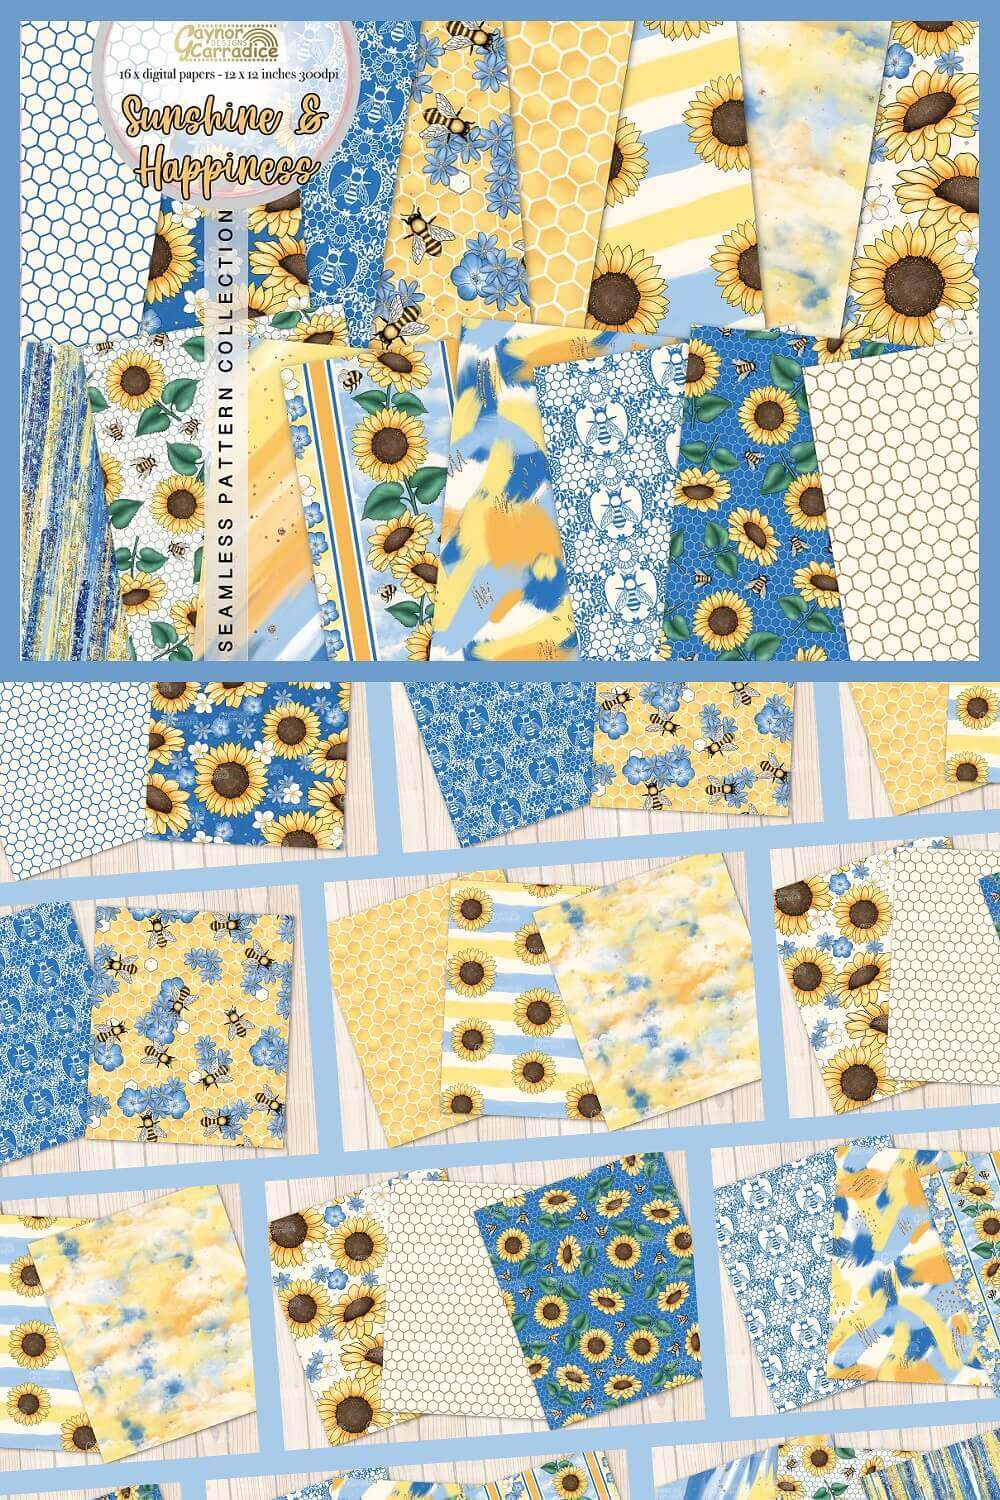 Prints with blue, yellow, orange and white colors.